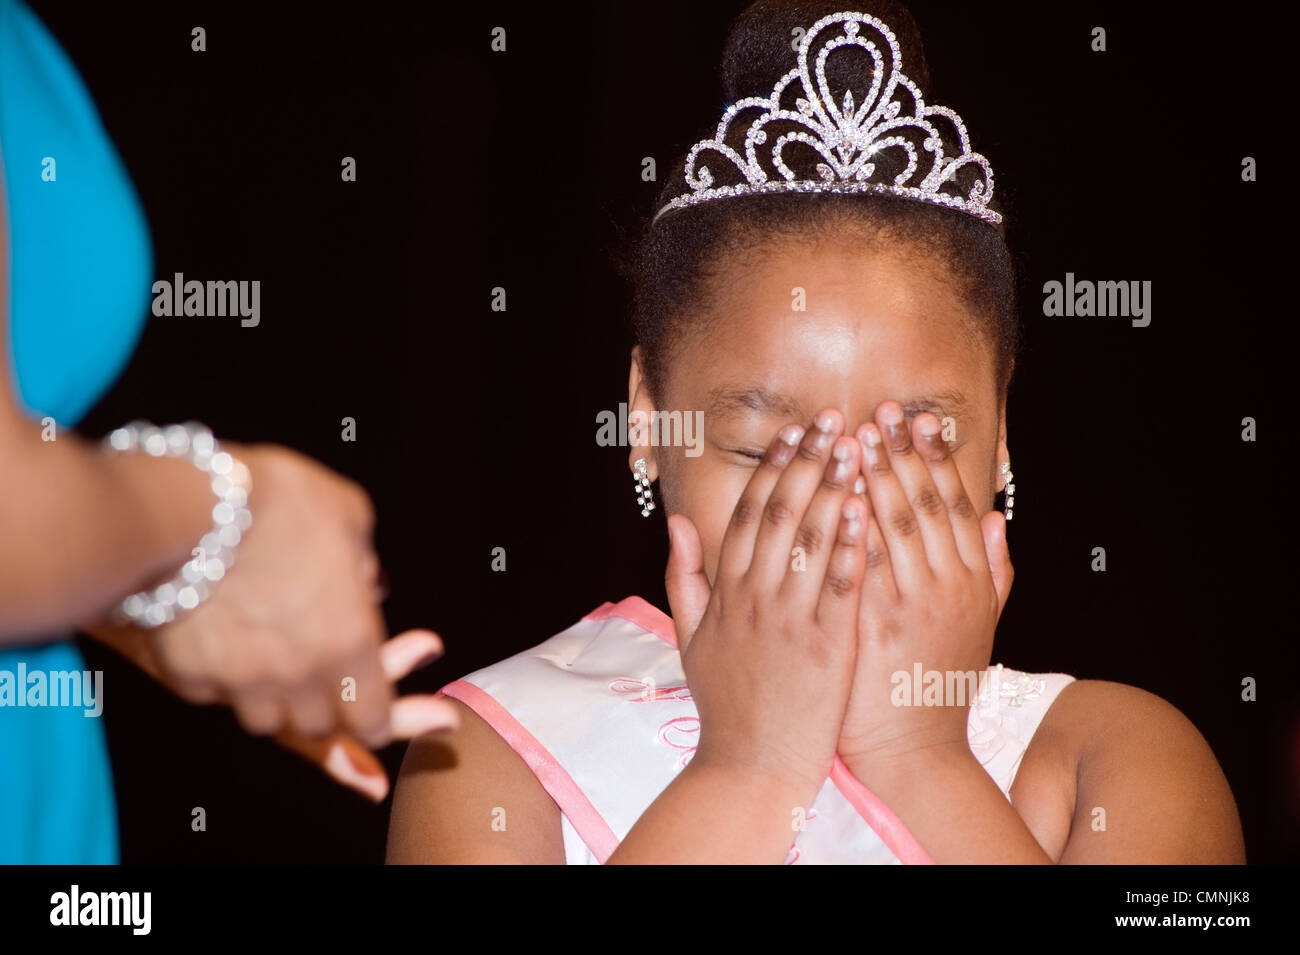 Image from the 2010 Ethnic New England Pageant held on April 3rd Stock Photo